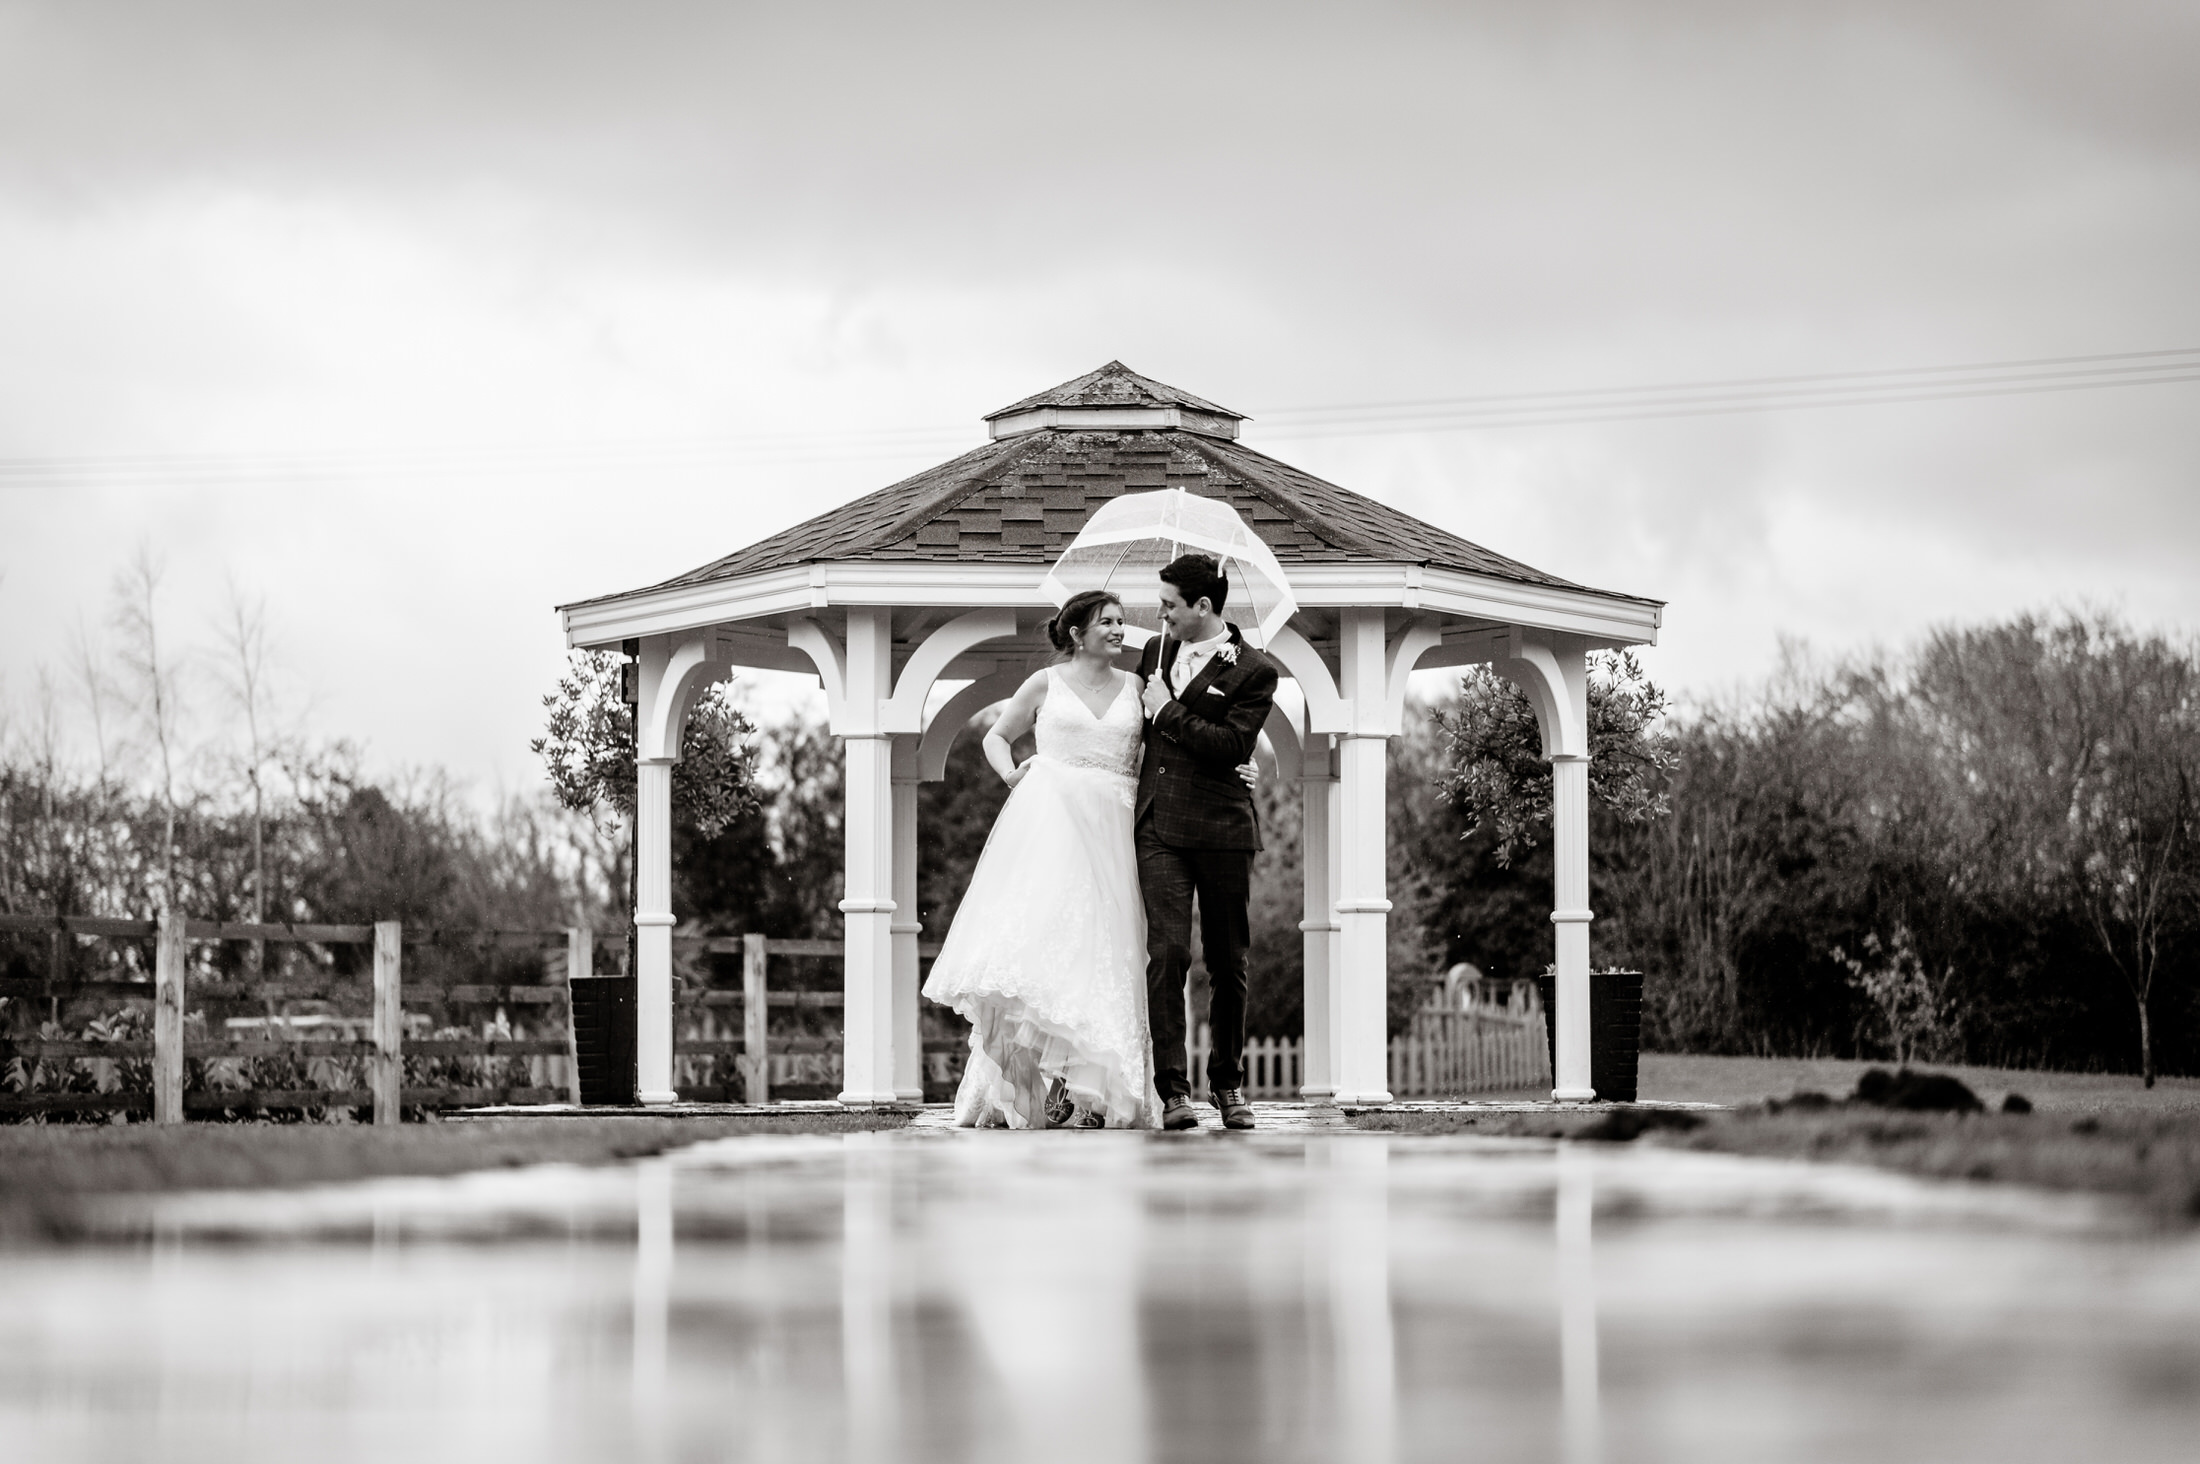 A bride and groom standing under an umbrella in front of the Brackenborough Hotel gazebo during their wedding.